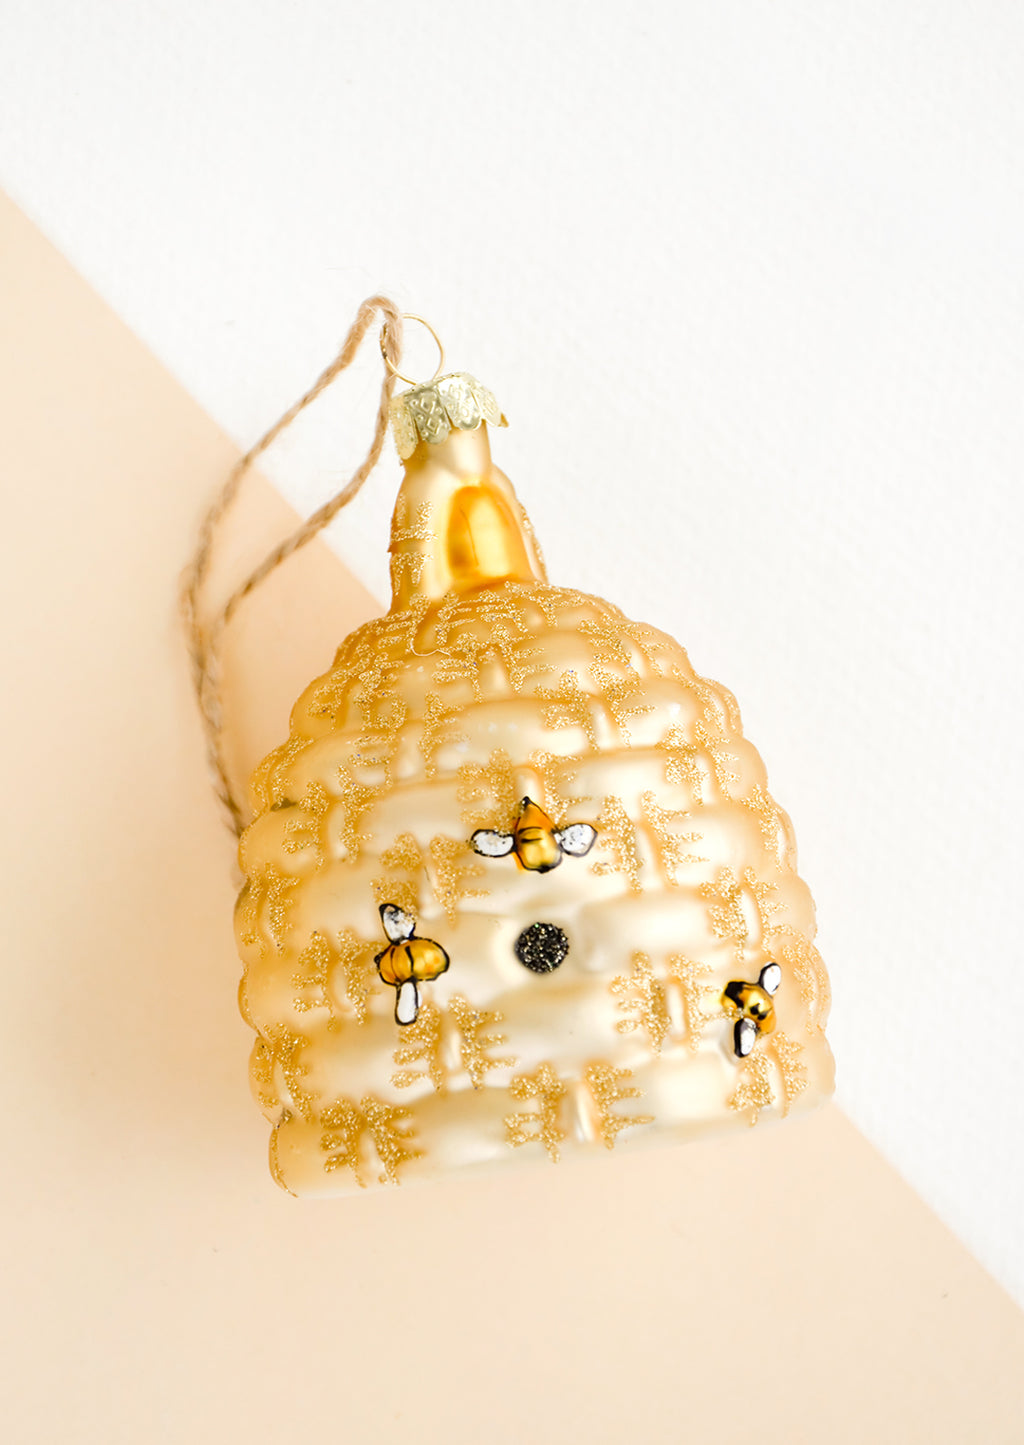 1: A glass ornament in the shape of a beehive with painted on bees.